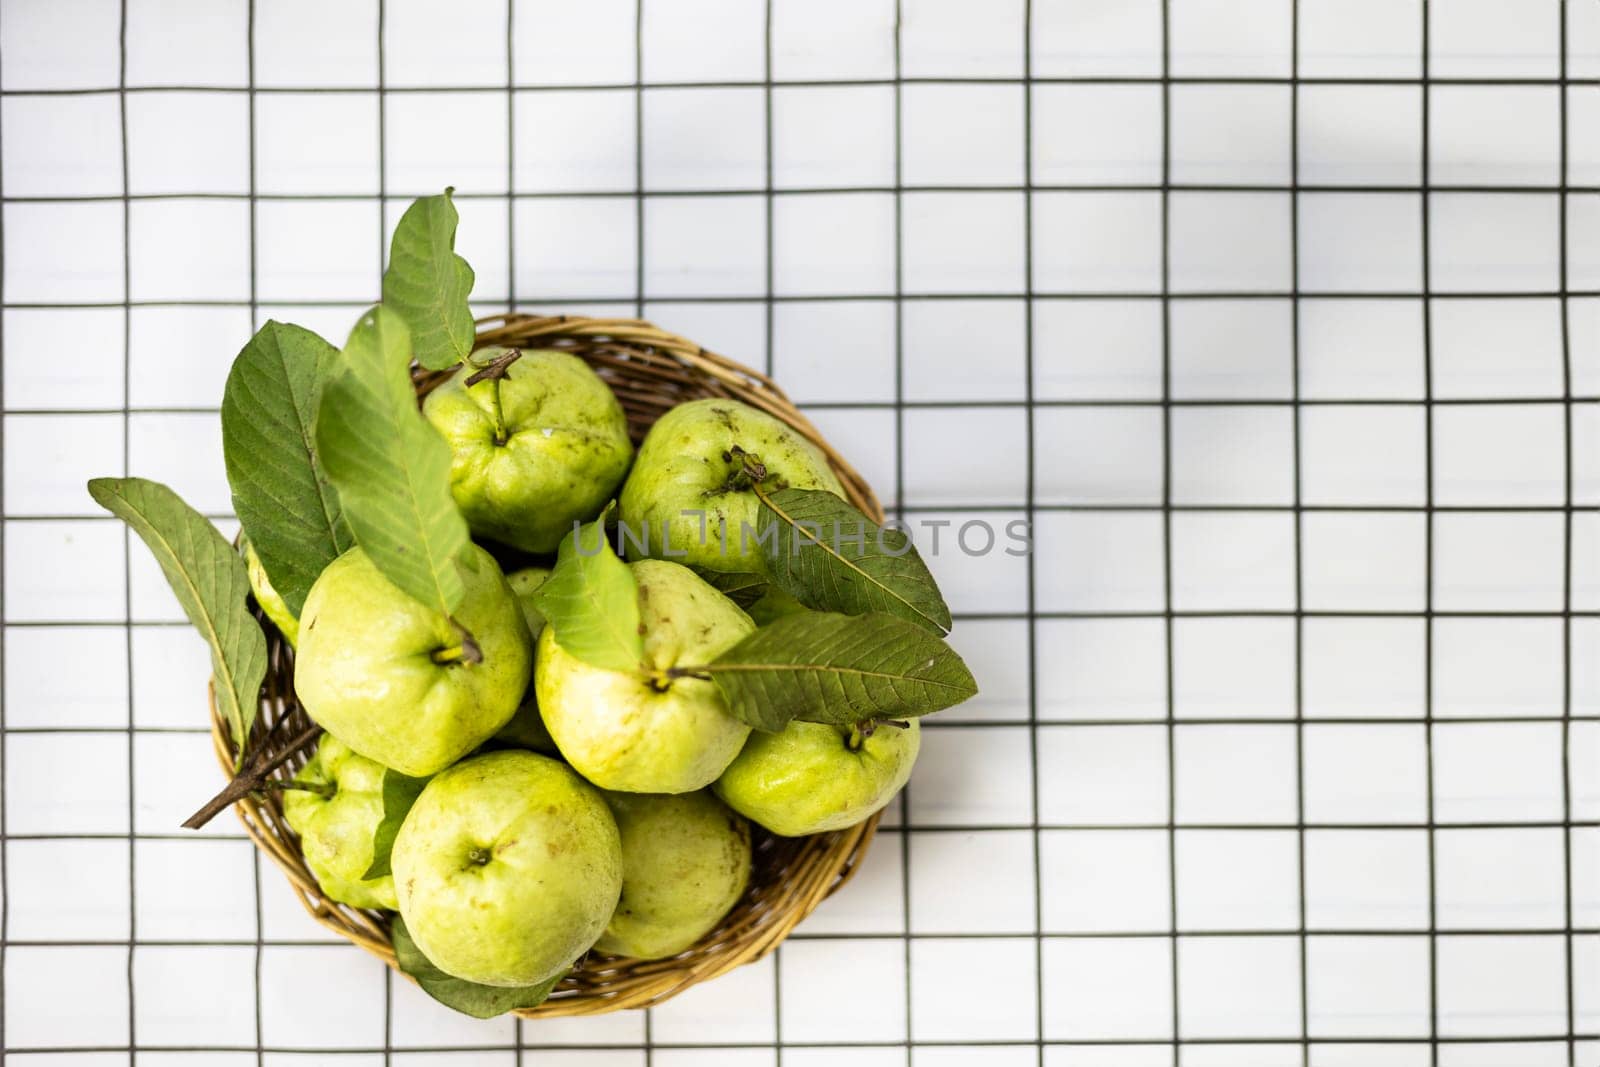 Top view a fresh green raw guava. Fruit with bright green bark and white pulp, sweet, crispy in a bamboo basket isolate on a white background